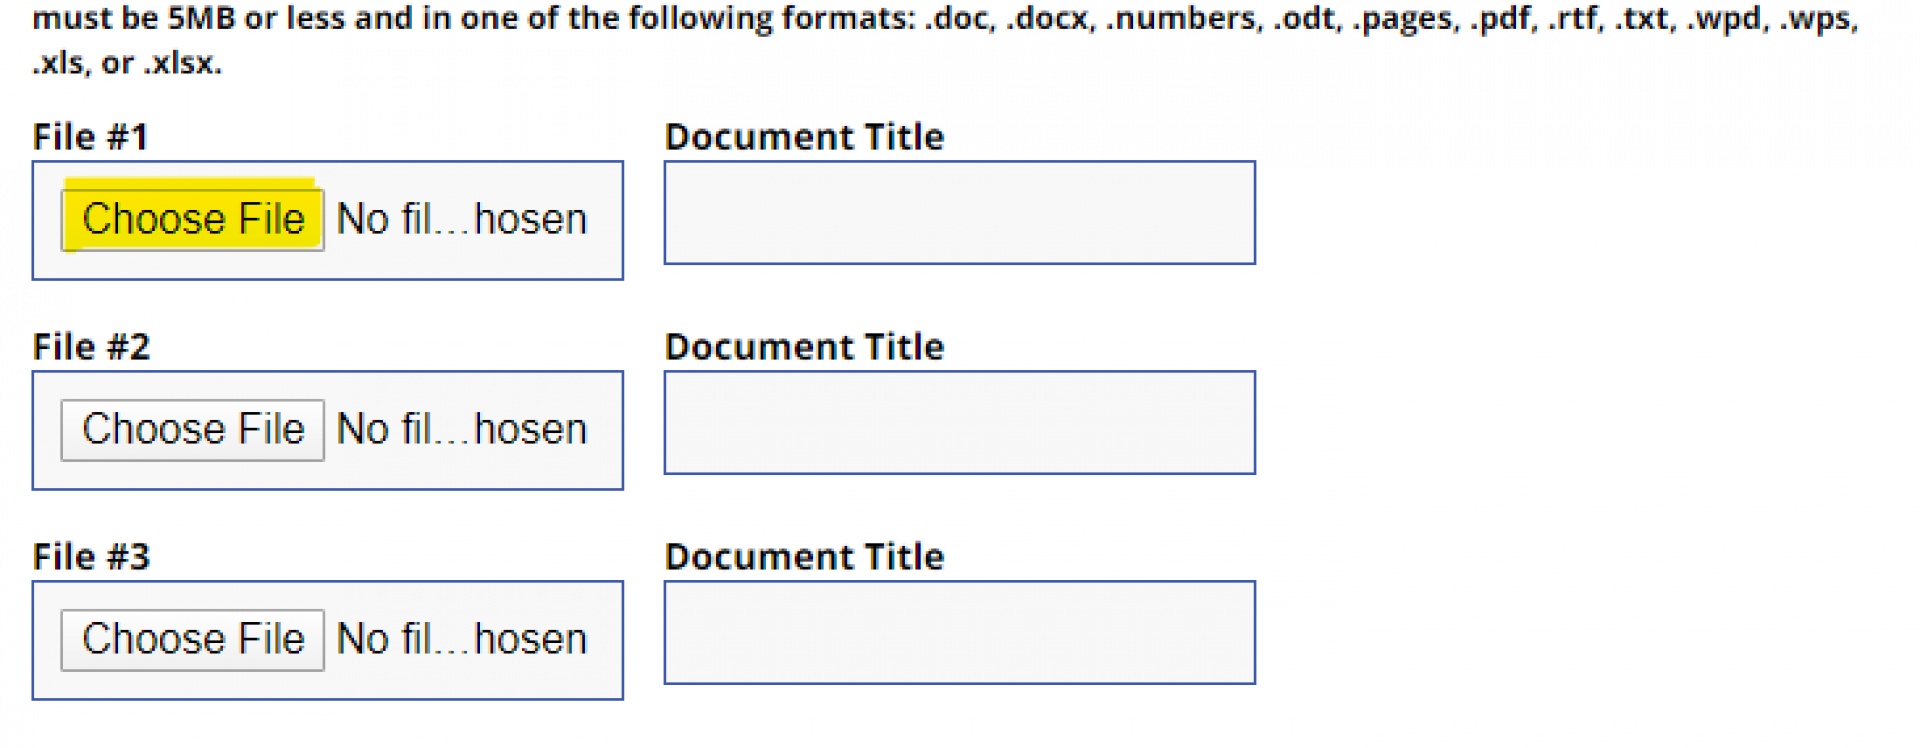 An image of where to upload Forms in the Appointment Form.